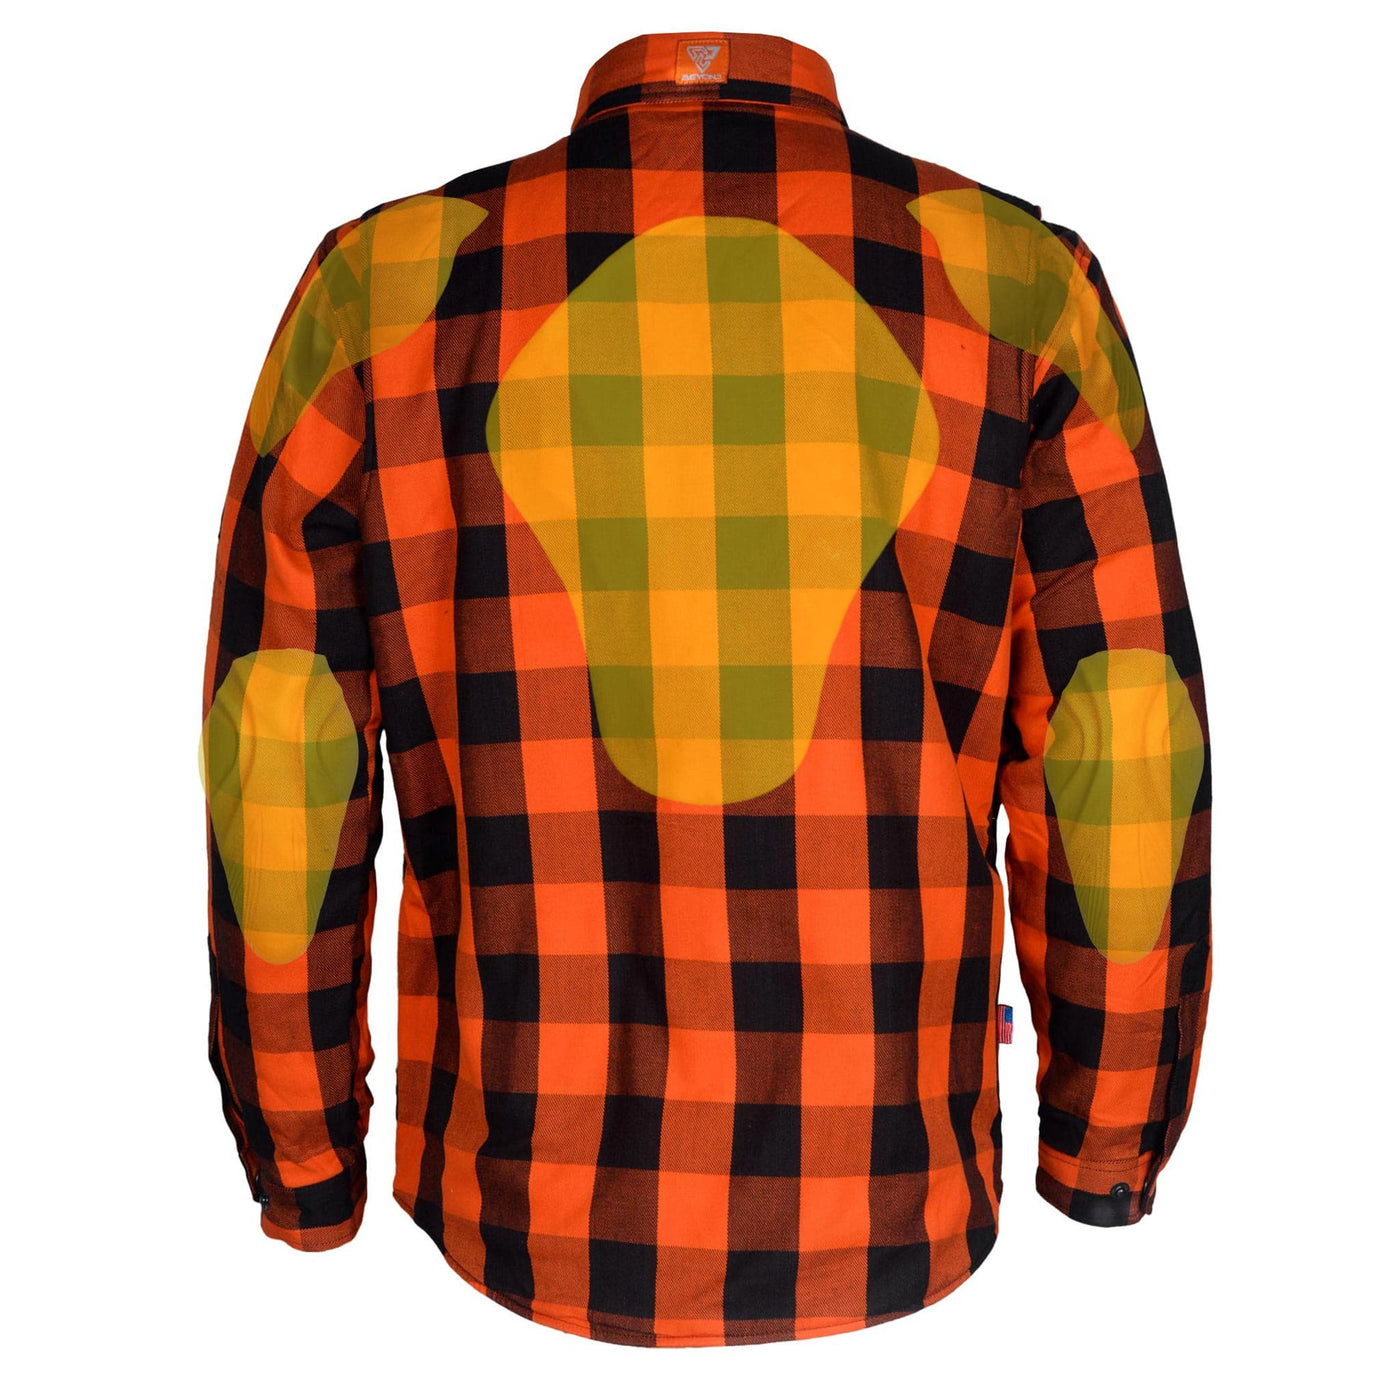 Protective Flannel Shirt with Pads "Autumn Blast" - Orange and Black Checkered